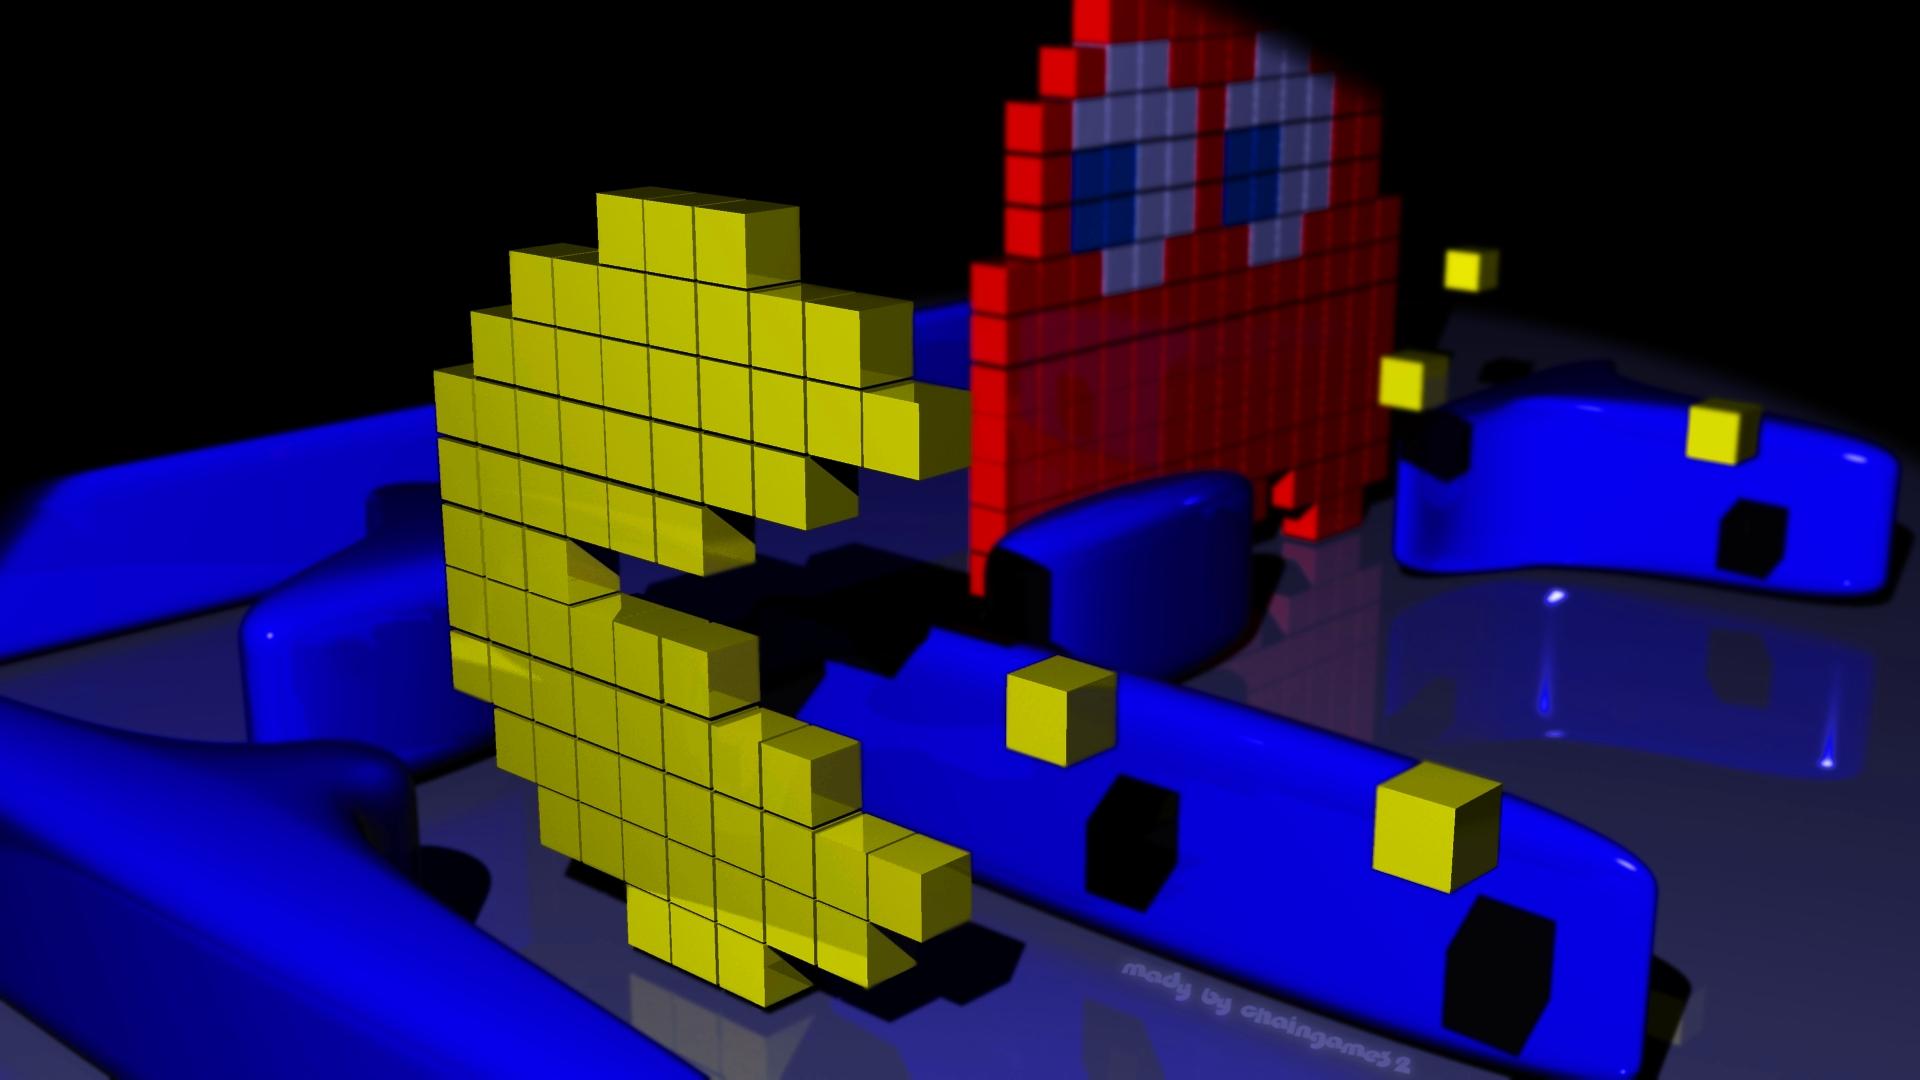 Wallpaper Pacman 3D. Awesome 3D